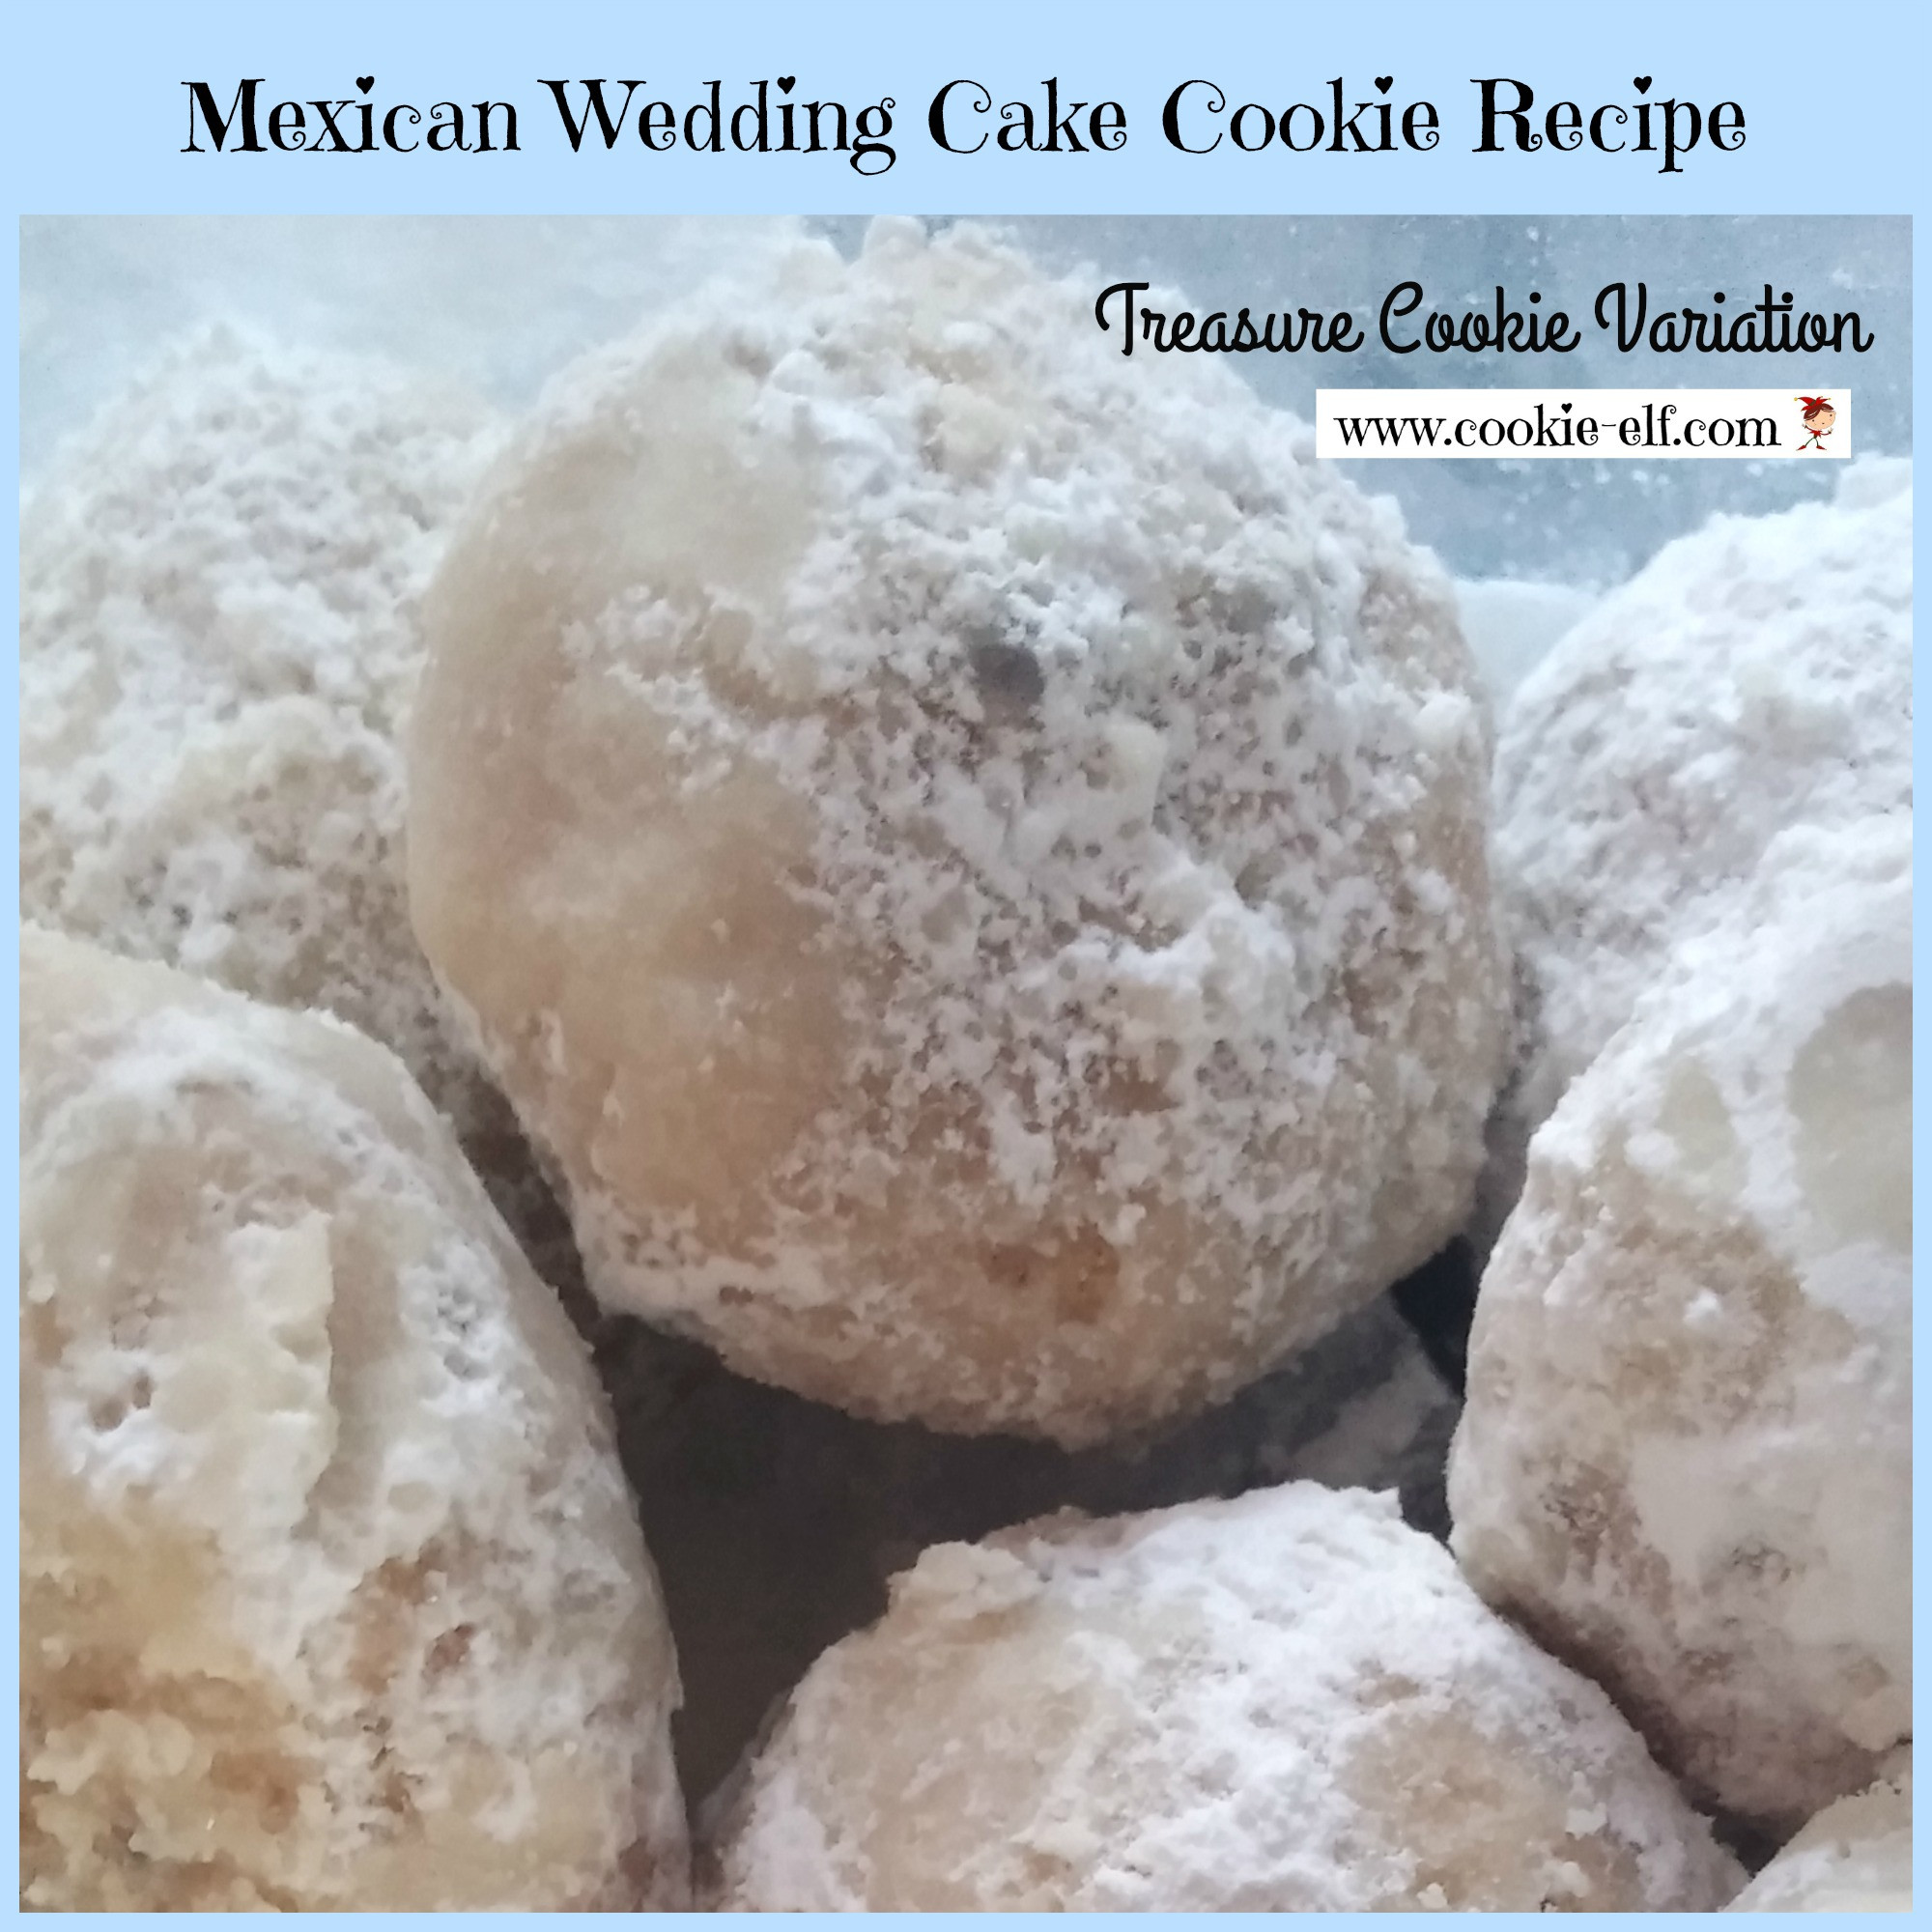 Mexican Wedding Cake Cookie Recipes
 Mexican Wedding Cake Cookie Recipe Easy “Treasure Cookies